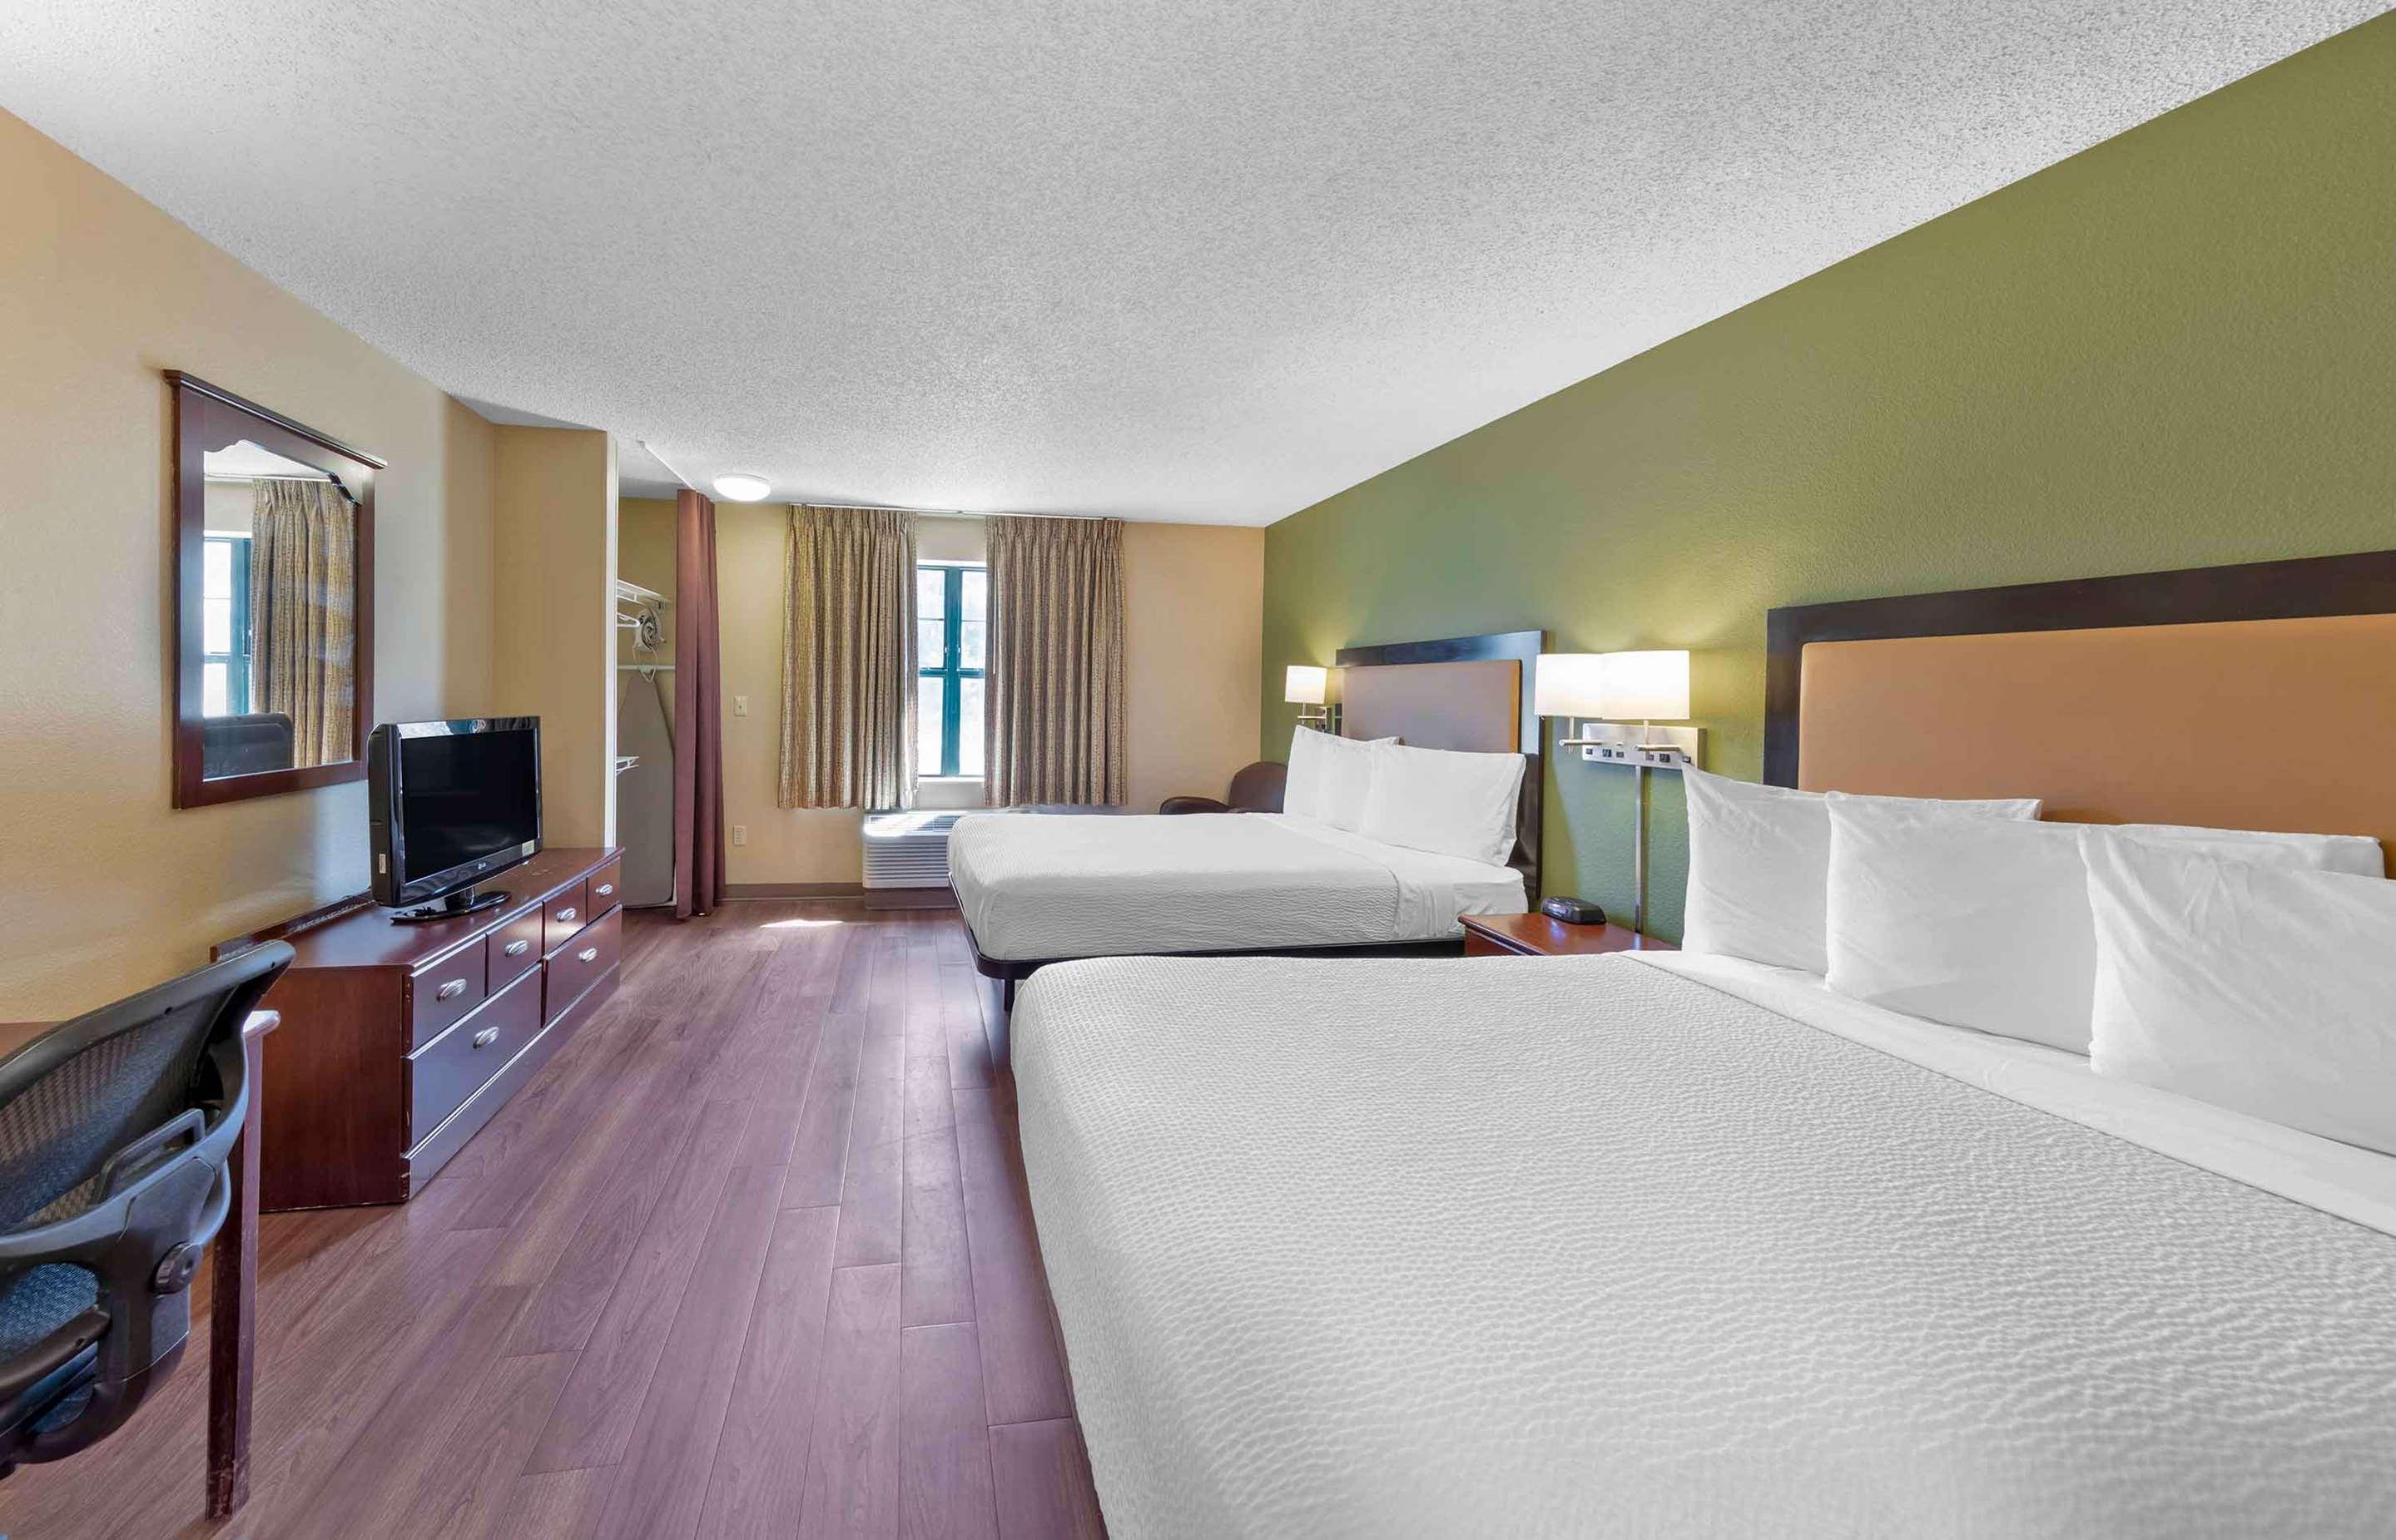 Holiday Inn Express & Suites SEATTLE NORTH - LYNNWOOD 𝗕𝗢𝗢𝗞 Snohomish  Hotel 𝘄𝗶𝘁𝗵 ₹𝟬 𝗣𝗔𝗬𝗠𝗘𝗡𝗧